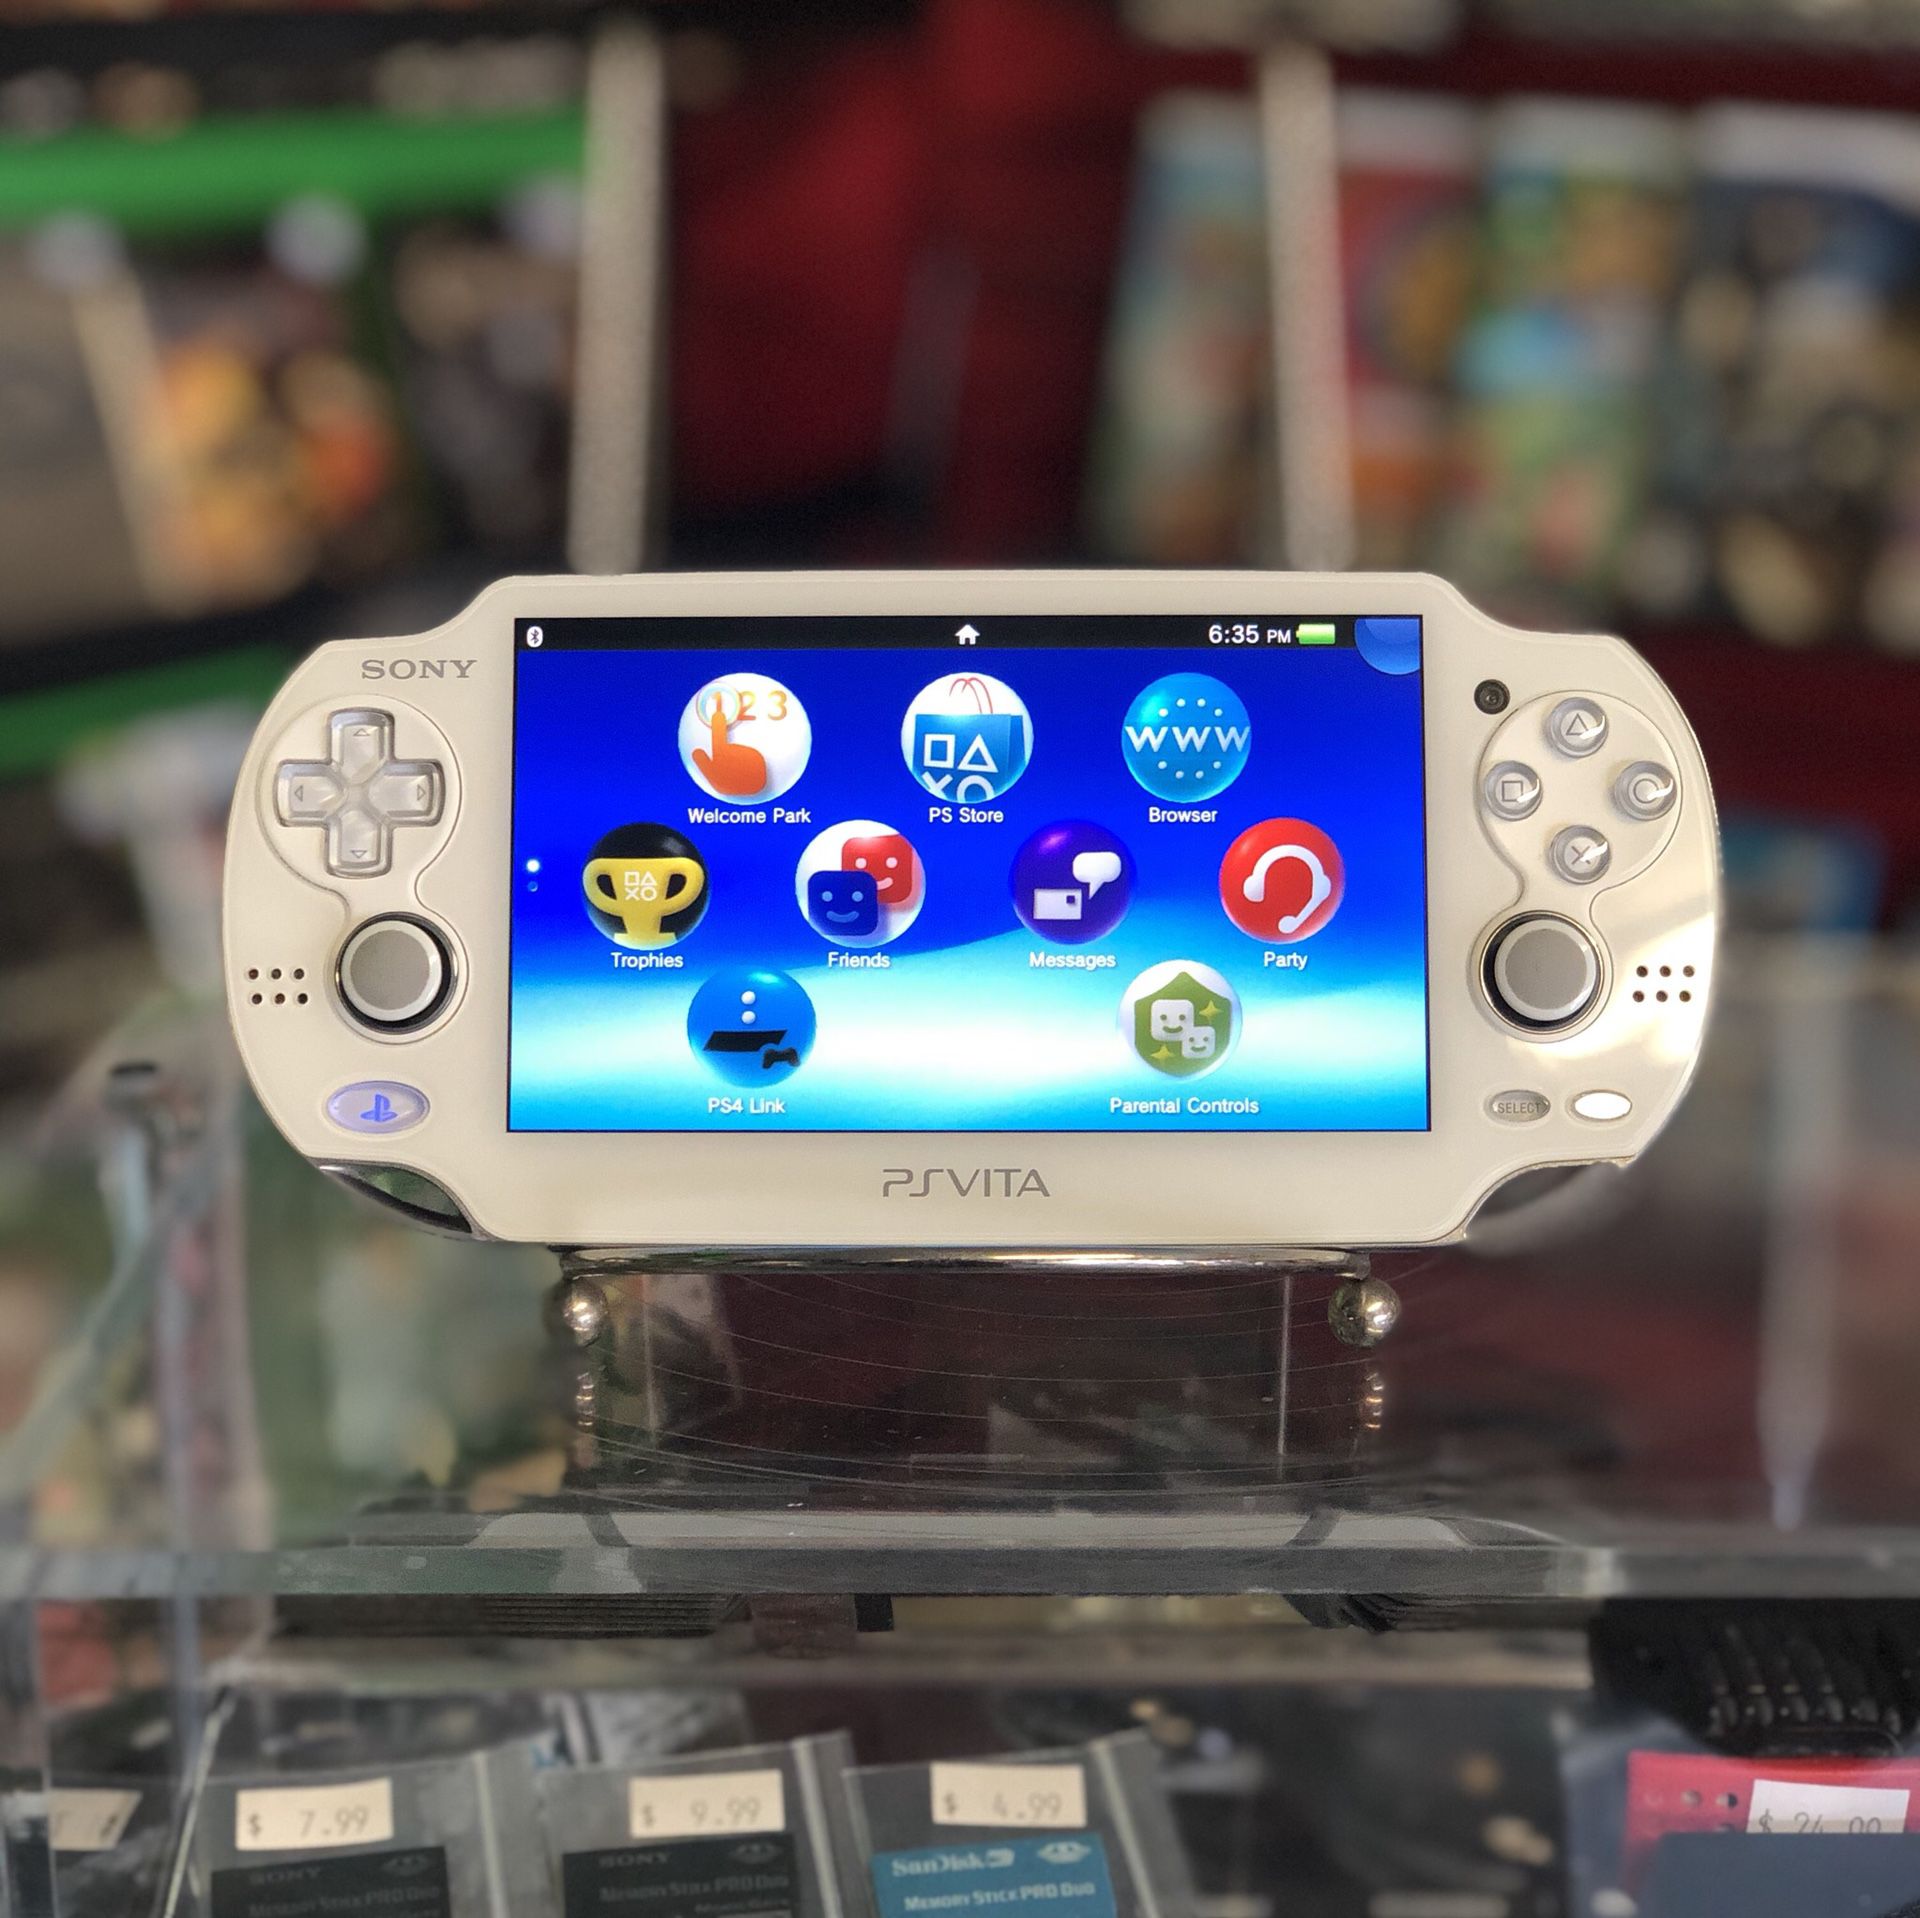 PS Vita in excellent condition and 8Gb memory card